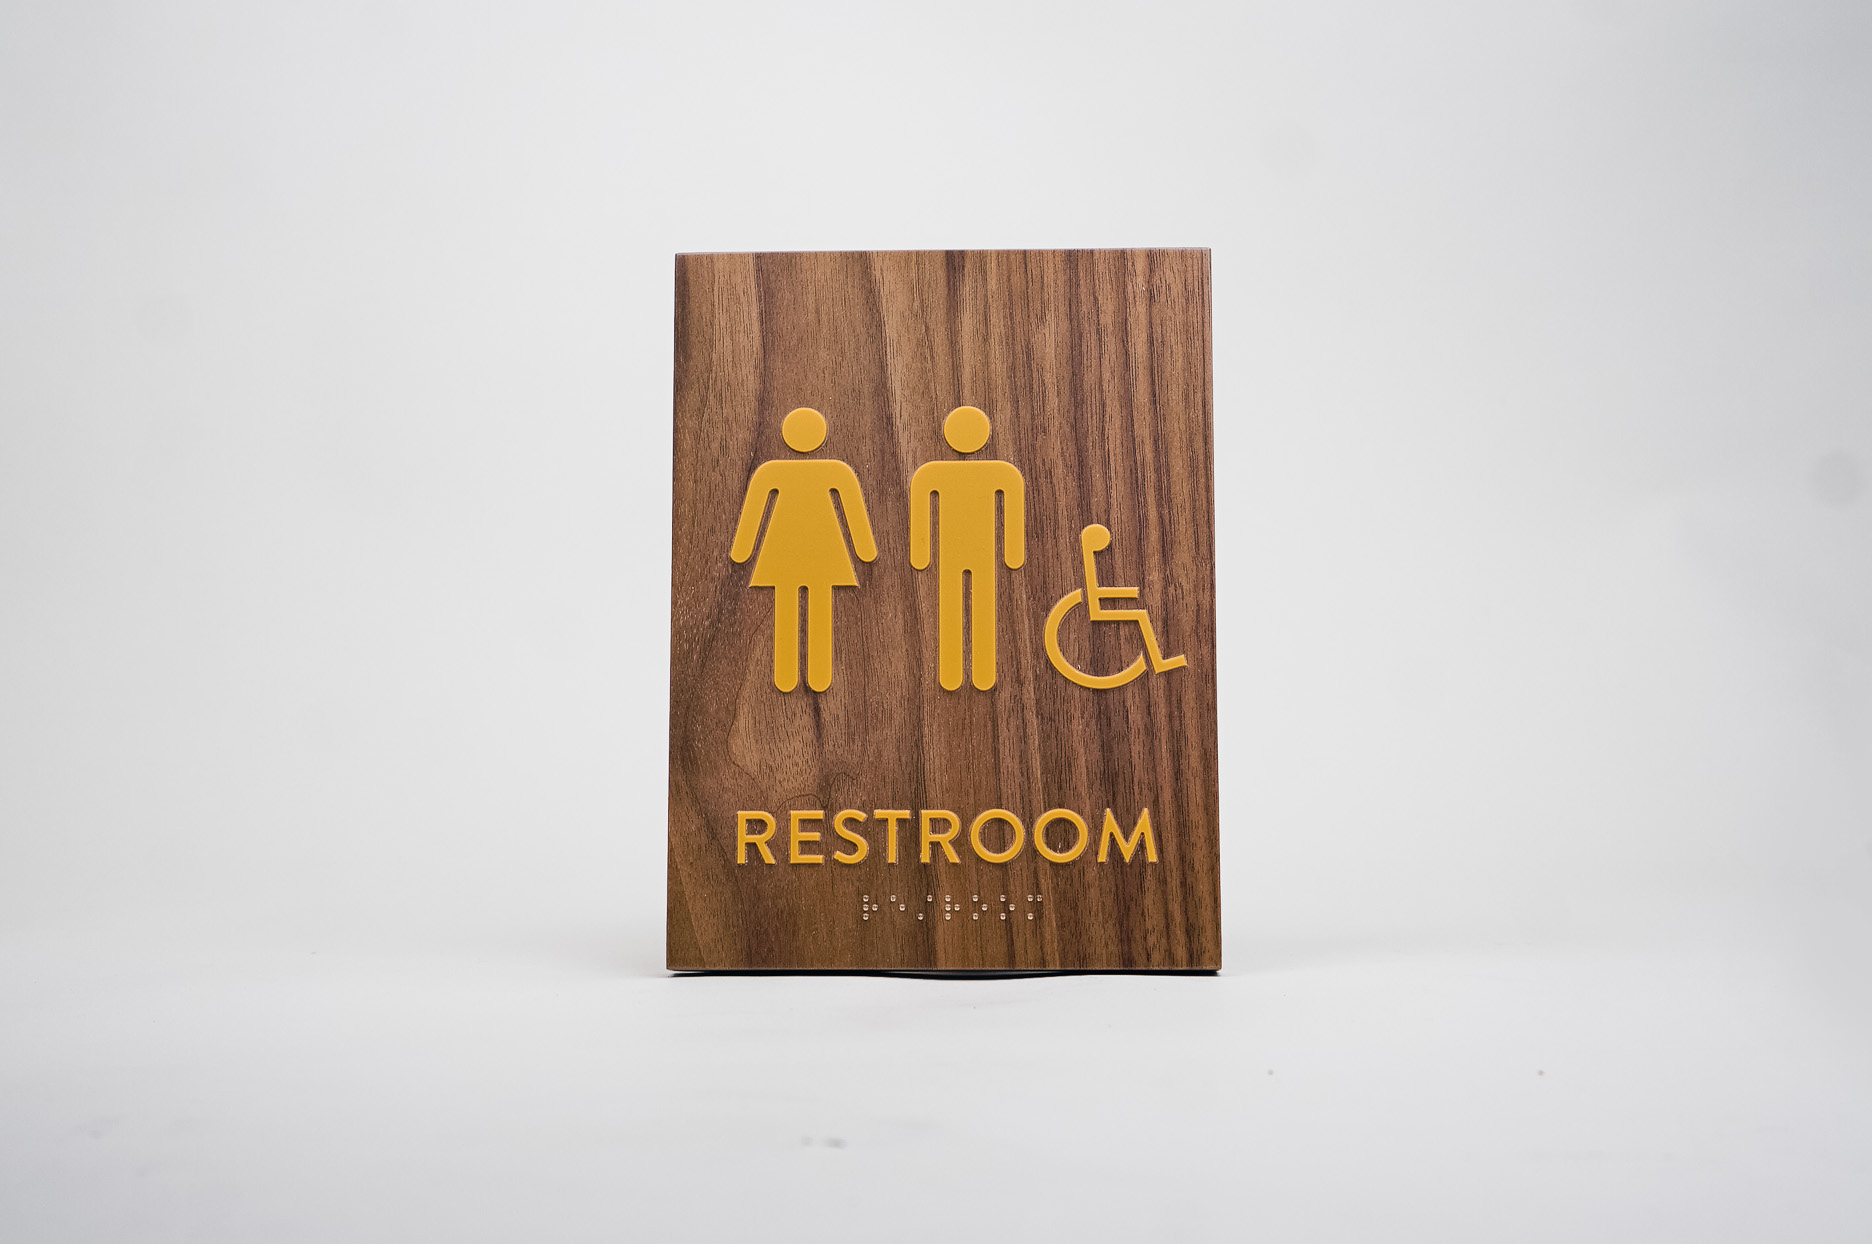 Gold and walnut wood ADA compliant restroom sign